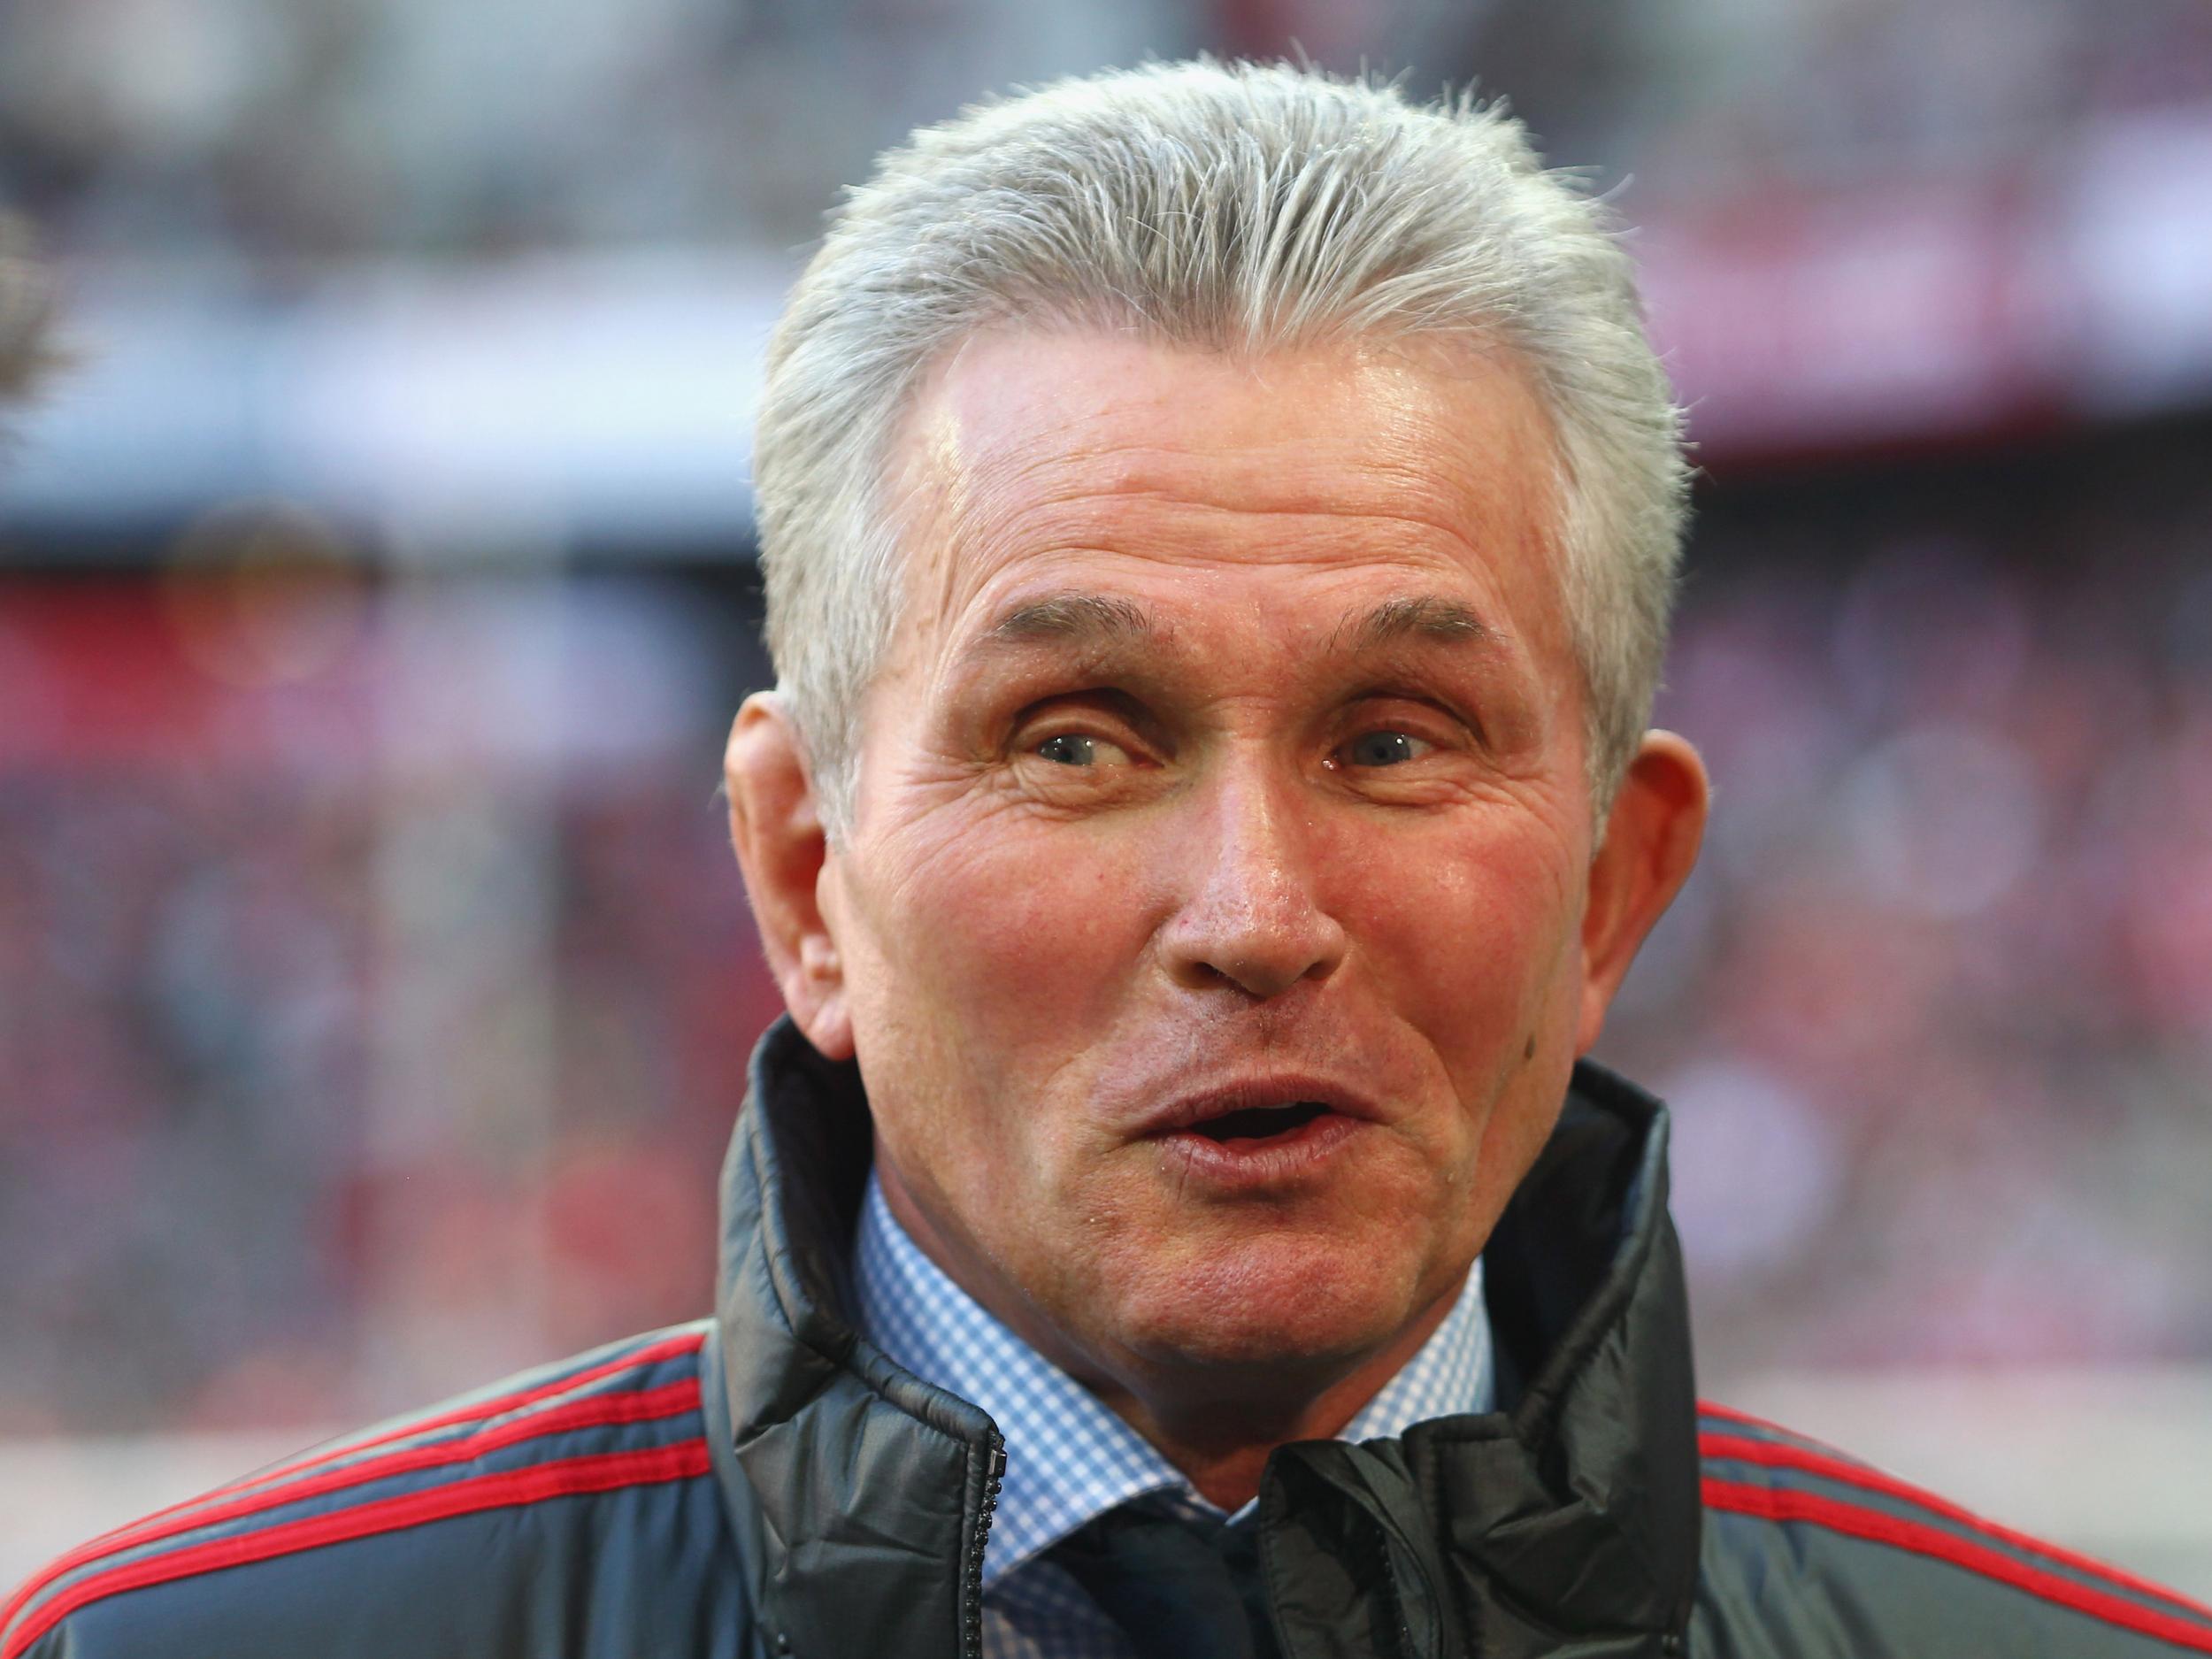 Jupp Heynckes has spent three previous spells in charge of Bayern Munich